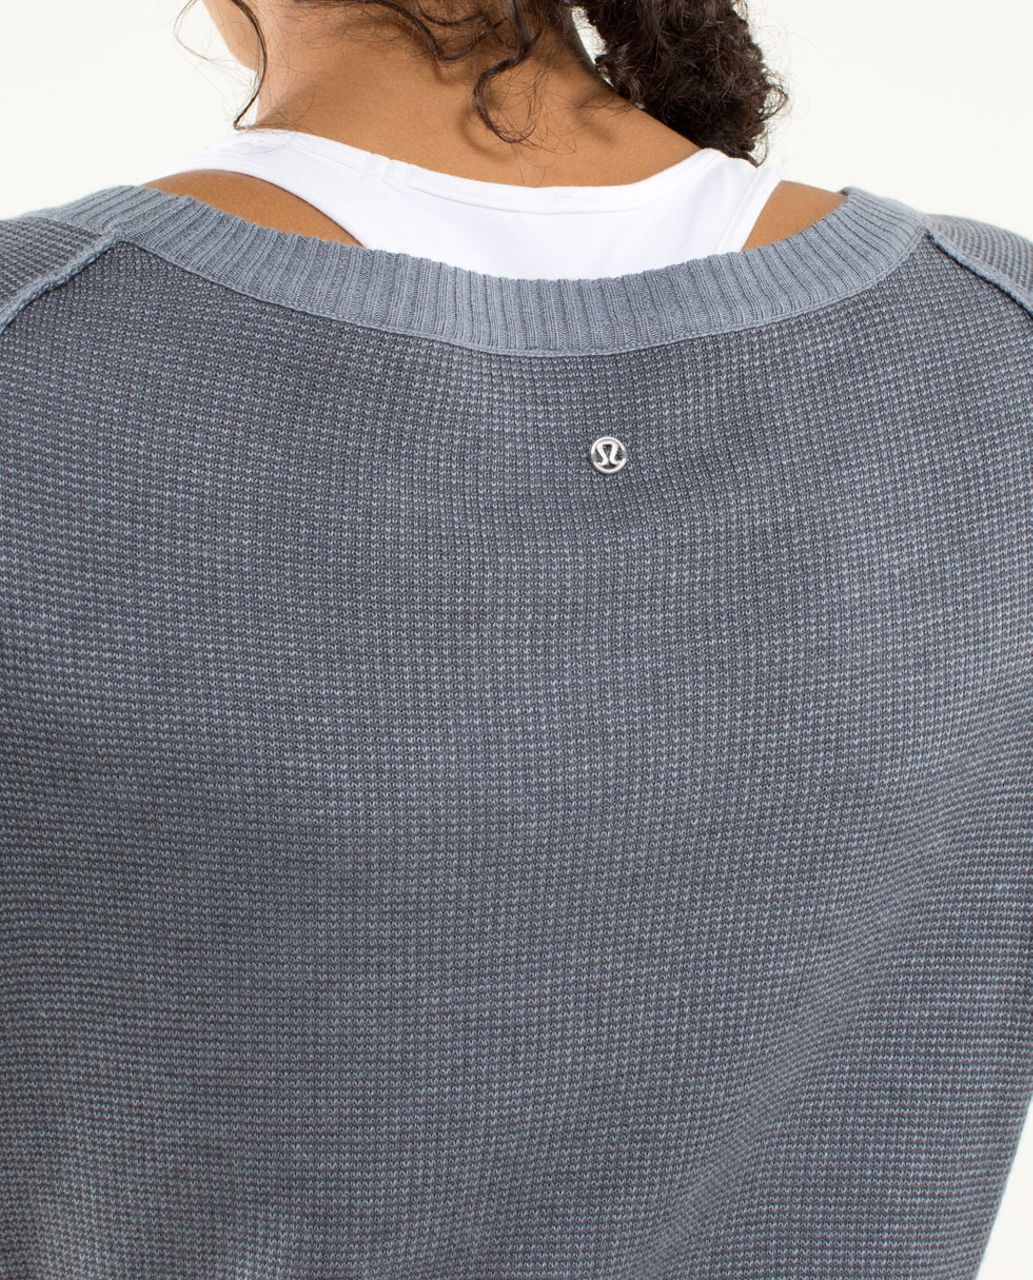 Lululemon Chai Time Pullover II (First Release) - Heathered Blurred Grey / Coal